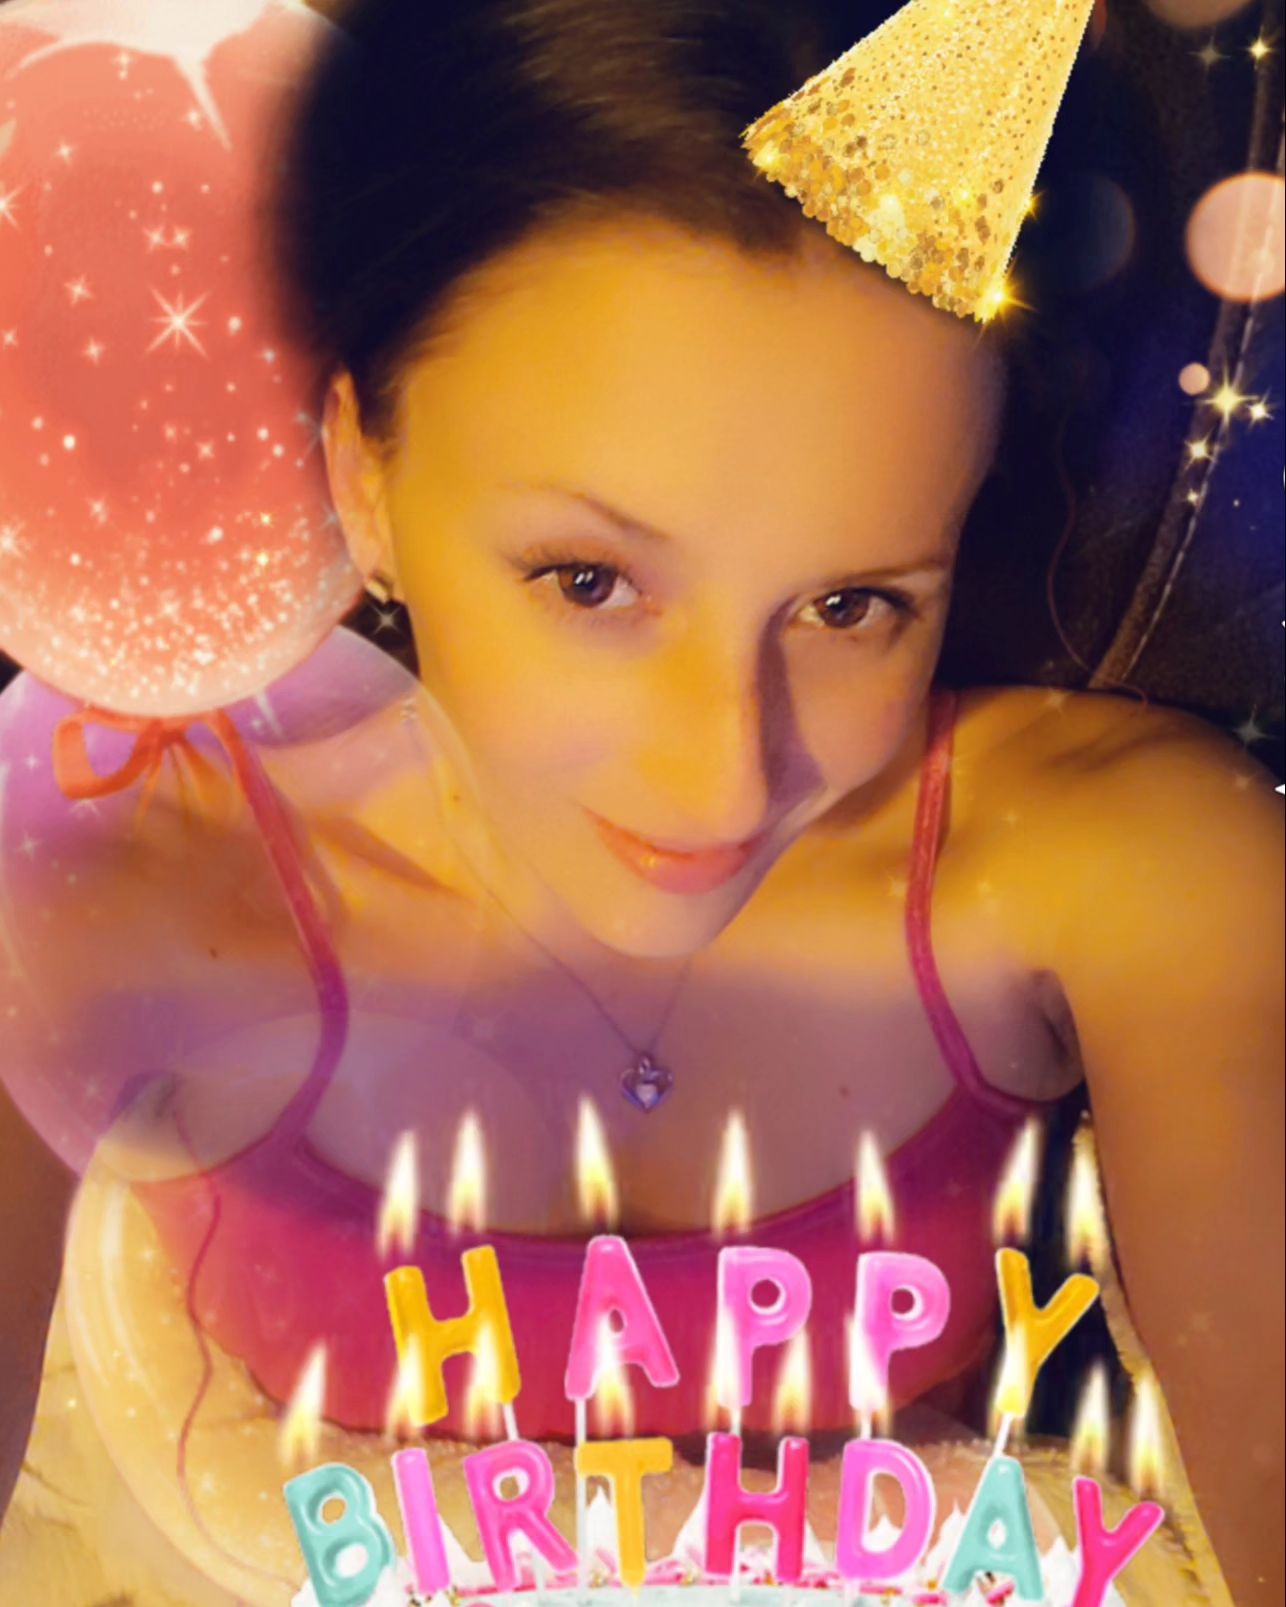 Another year older🥳😊it's definitely been a great year🫠 can't wait to enjoy this next year🥰
Follow and like for  posts daily 💕💋for more🌶 hit the linkinbio��
@hotmolly.of
@sexymomma.710
#onlyfangirl #freeonlyfans #onlyfansbae #model #modelofonlyfans #ig #instacosplay #instagirls #shoutout4shoutout  #linkinbio #snapforonlyfans #lovegirls   #bestofinsta #selfies #tbt#mfc #procontent #wolfie#cosplays #s4s #onlyfansgirls #shoutout #tattoos #snapchat #cutie #hotinstamodels #onlyfanzgirl